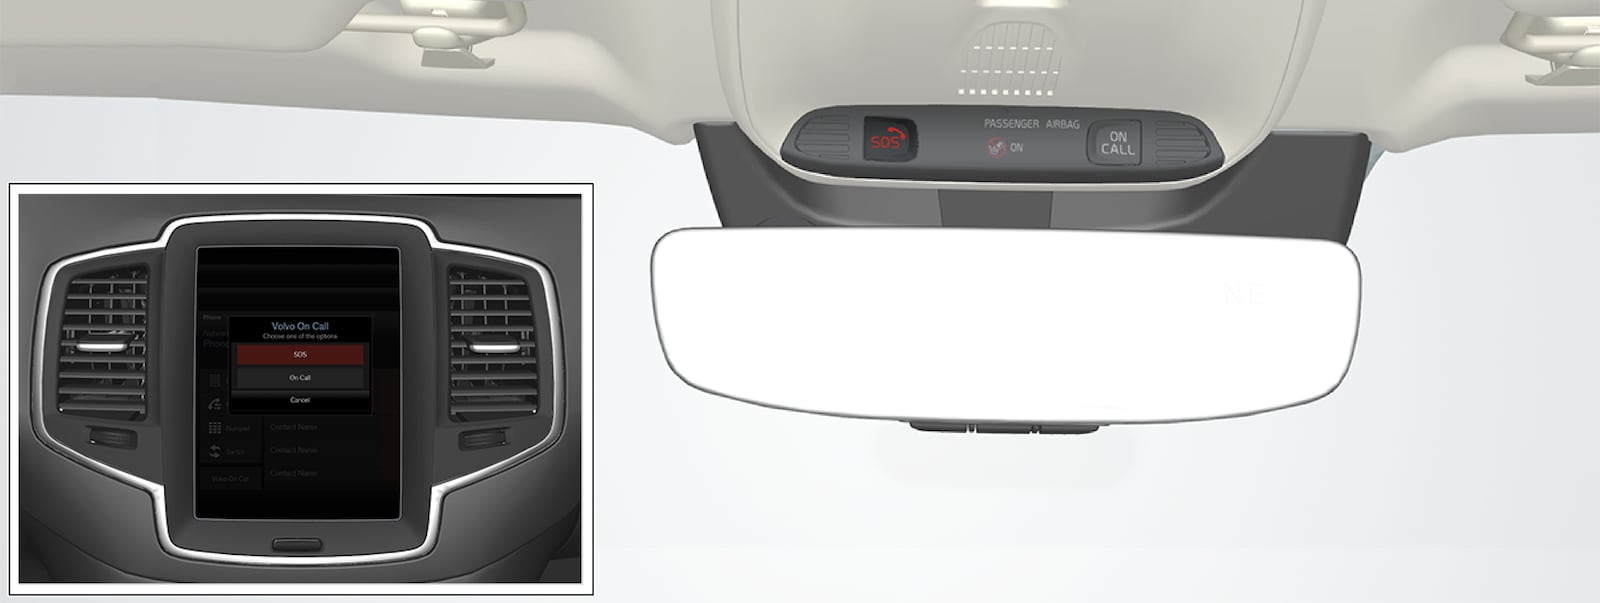 P5-1507-Volvo On call button